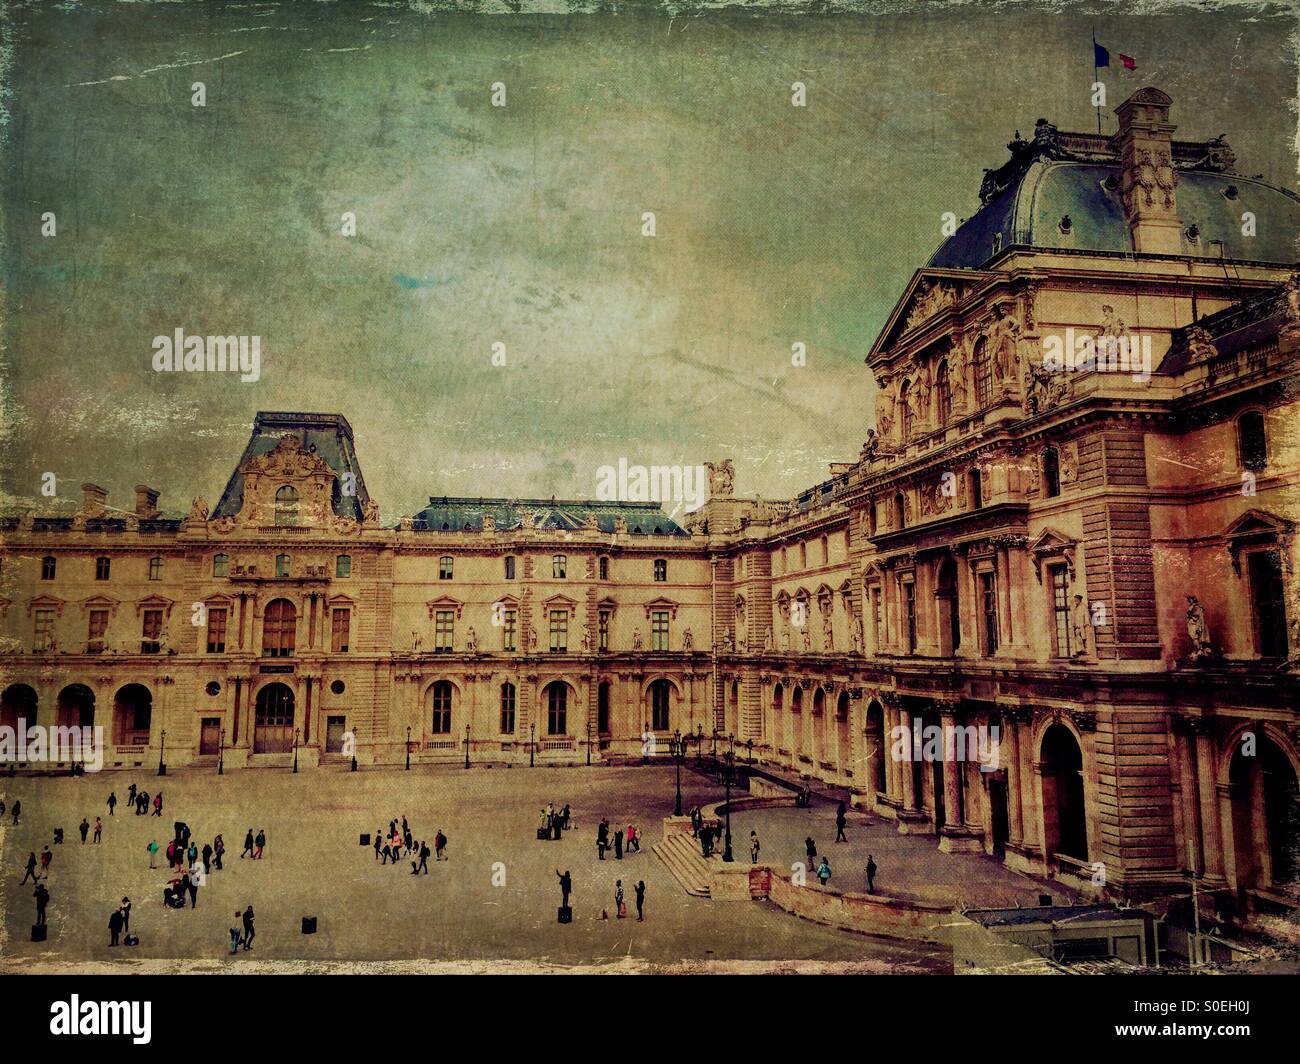 View of Musée du Louvre in Paris, France, taken from a second floor window. Tourists milling  below. Vintage texture overlay for aged, antique look. Stock Photo